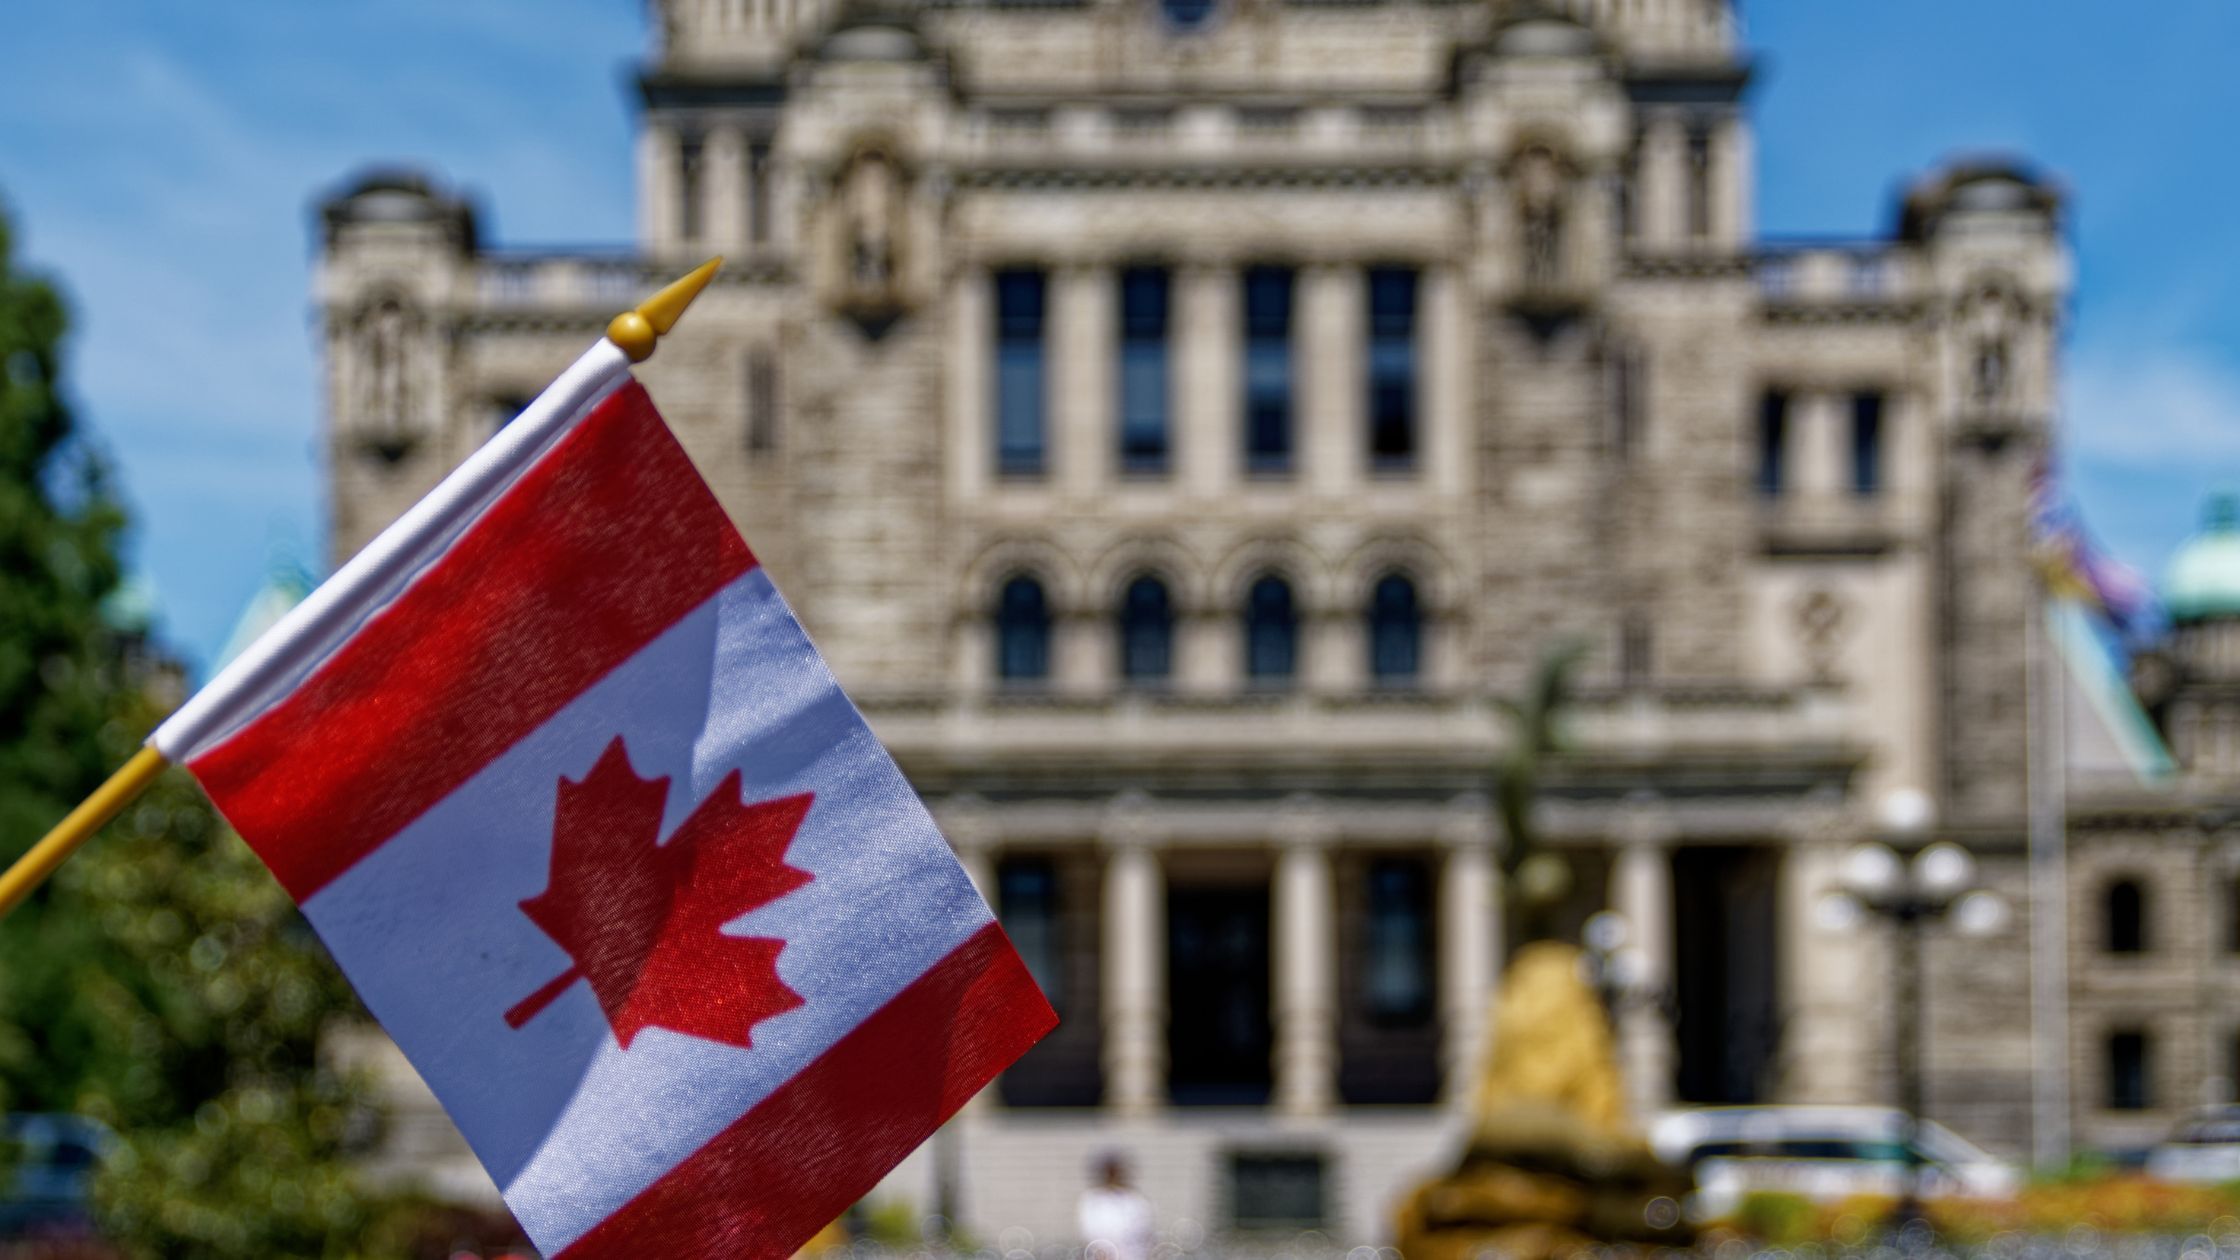 A Canadian flag in focus with a blurred background of a historic stone building and trees under a clear sky.